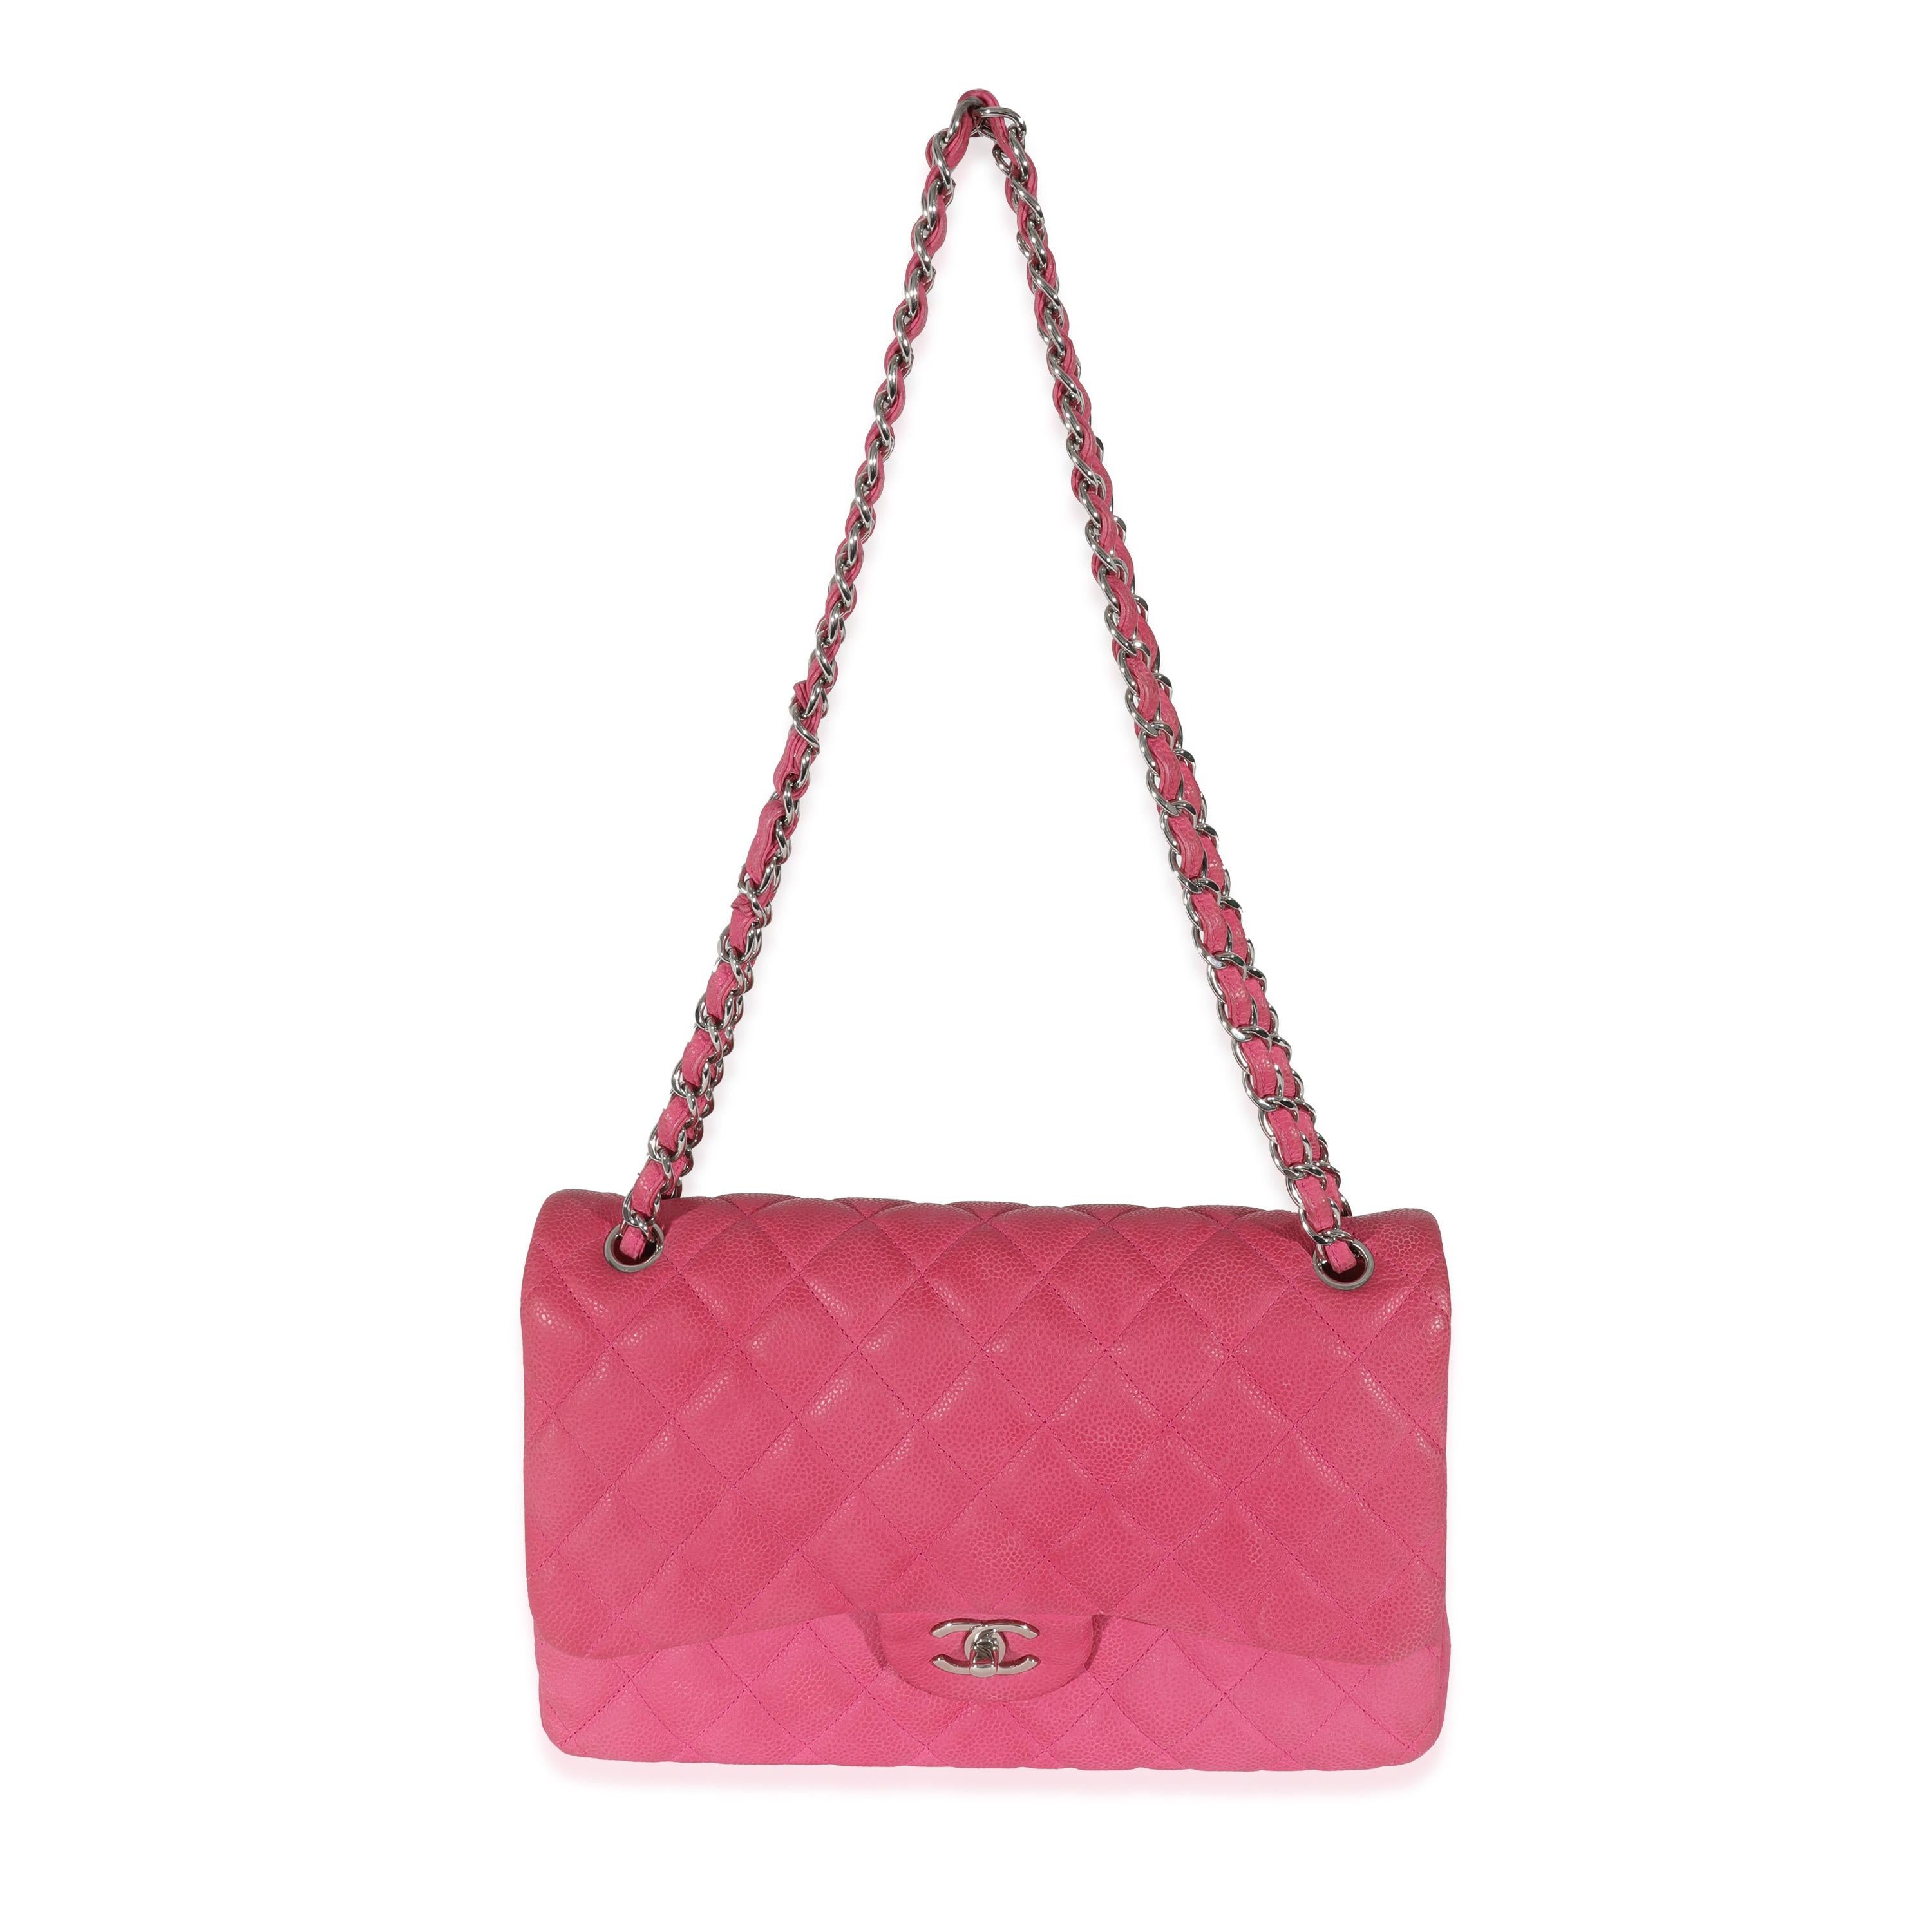 Listing Title: Chanel Pink Matte Caviar Jumbo Classic Double Flap Bag
SKU: 130707
Condition: Pre-owned 
Handbag Condition: Very Good
Condition Comments: Very Good Condition. Scuffing to corners and exterior. Discoloration to leather. Scratching to